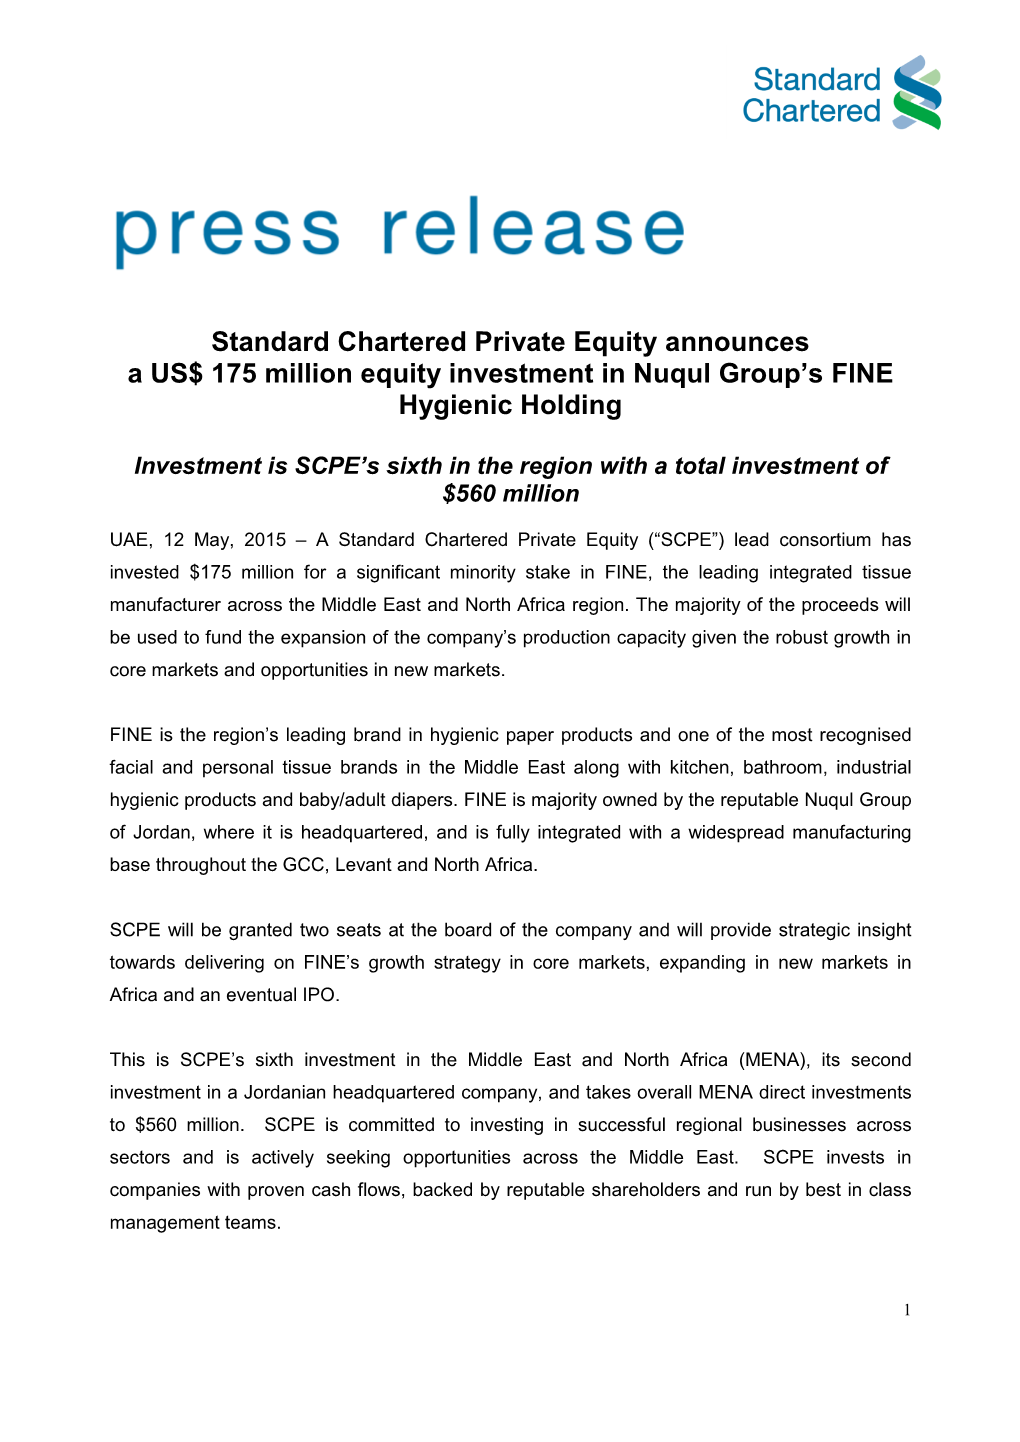 Standard Chartered Private Equity Announces a US$ 175 Million Equity Investment in Nuqul Group’S FINE Hygienic Holding